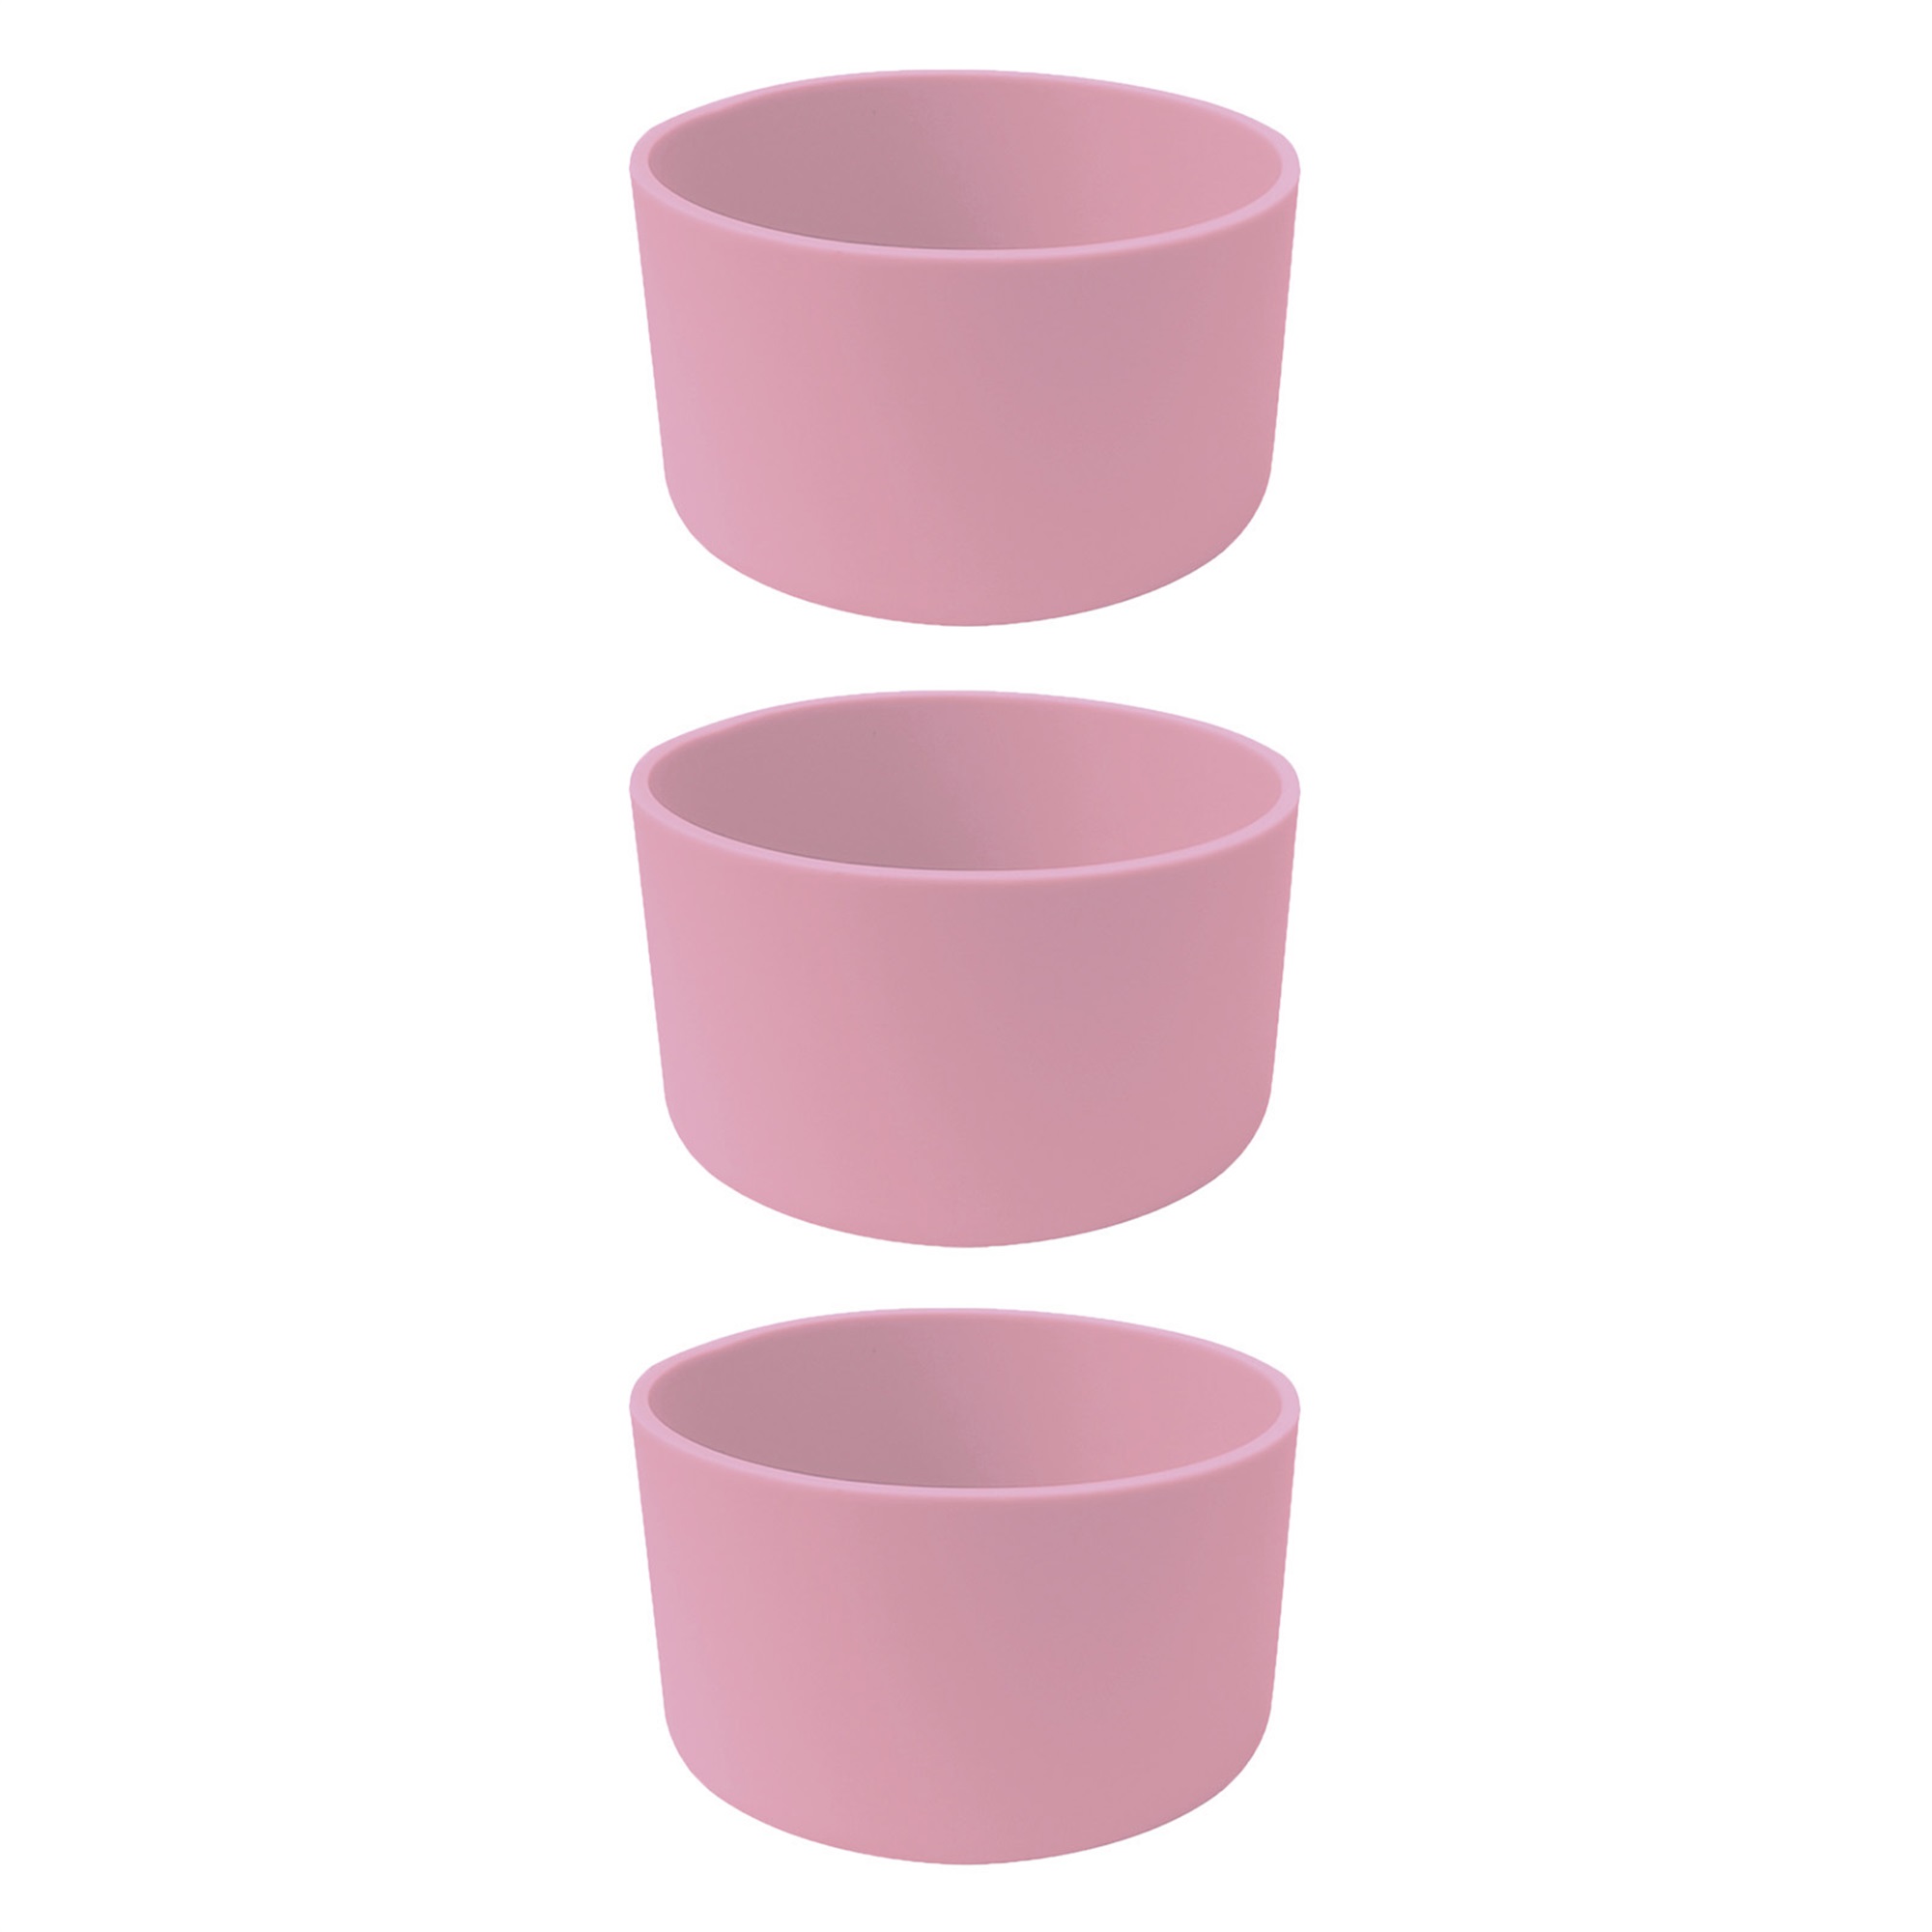 Silicone Cup Sleeves, Non-slip Heat-resistant Reusable Mug Protector